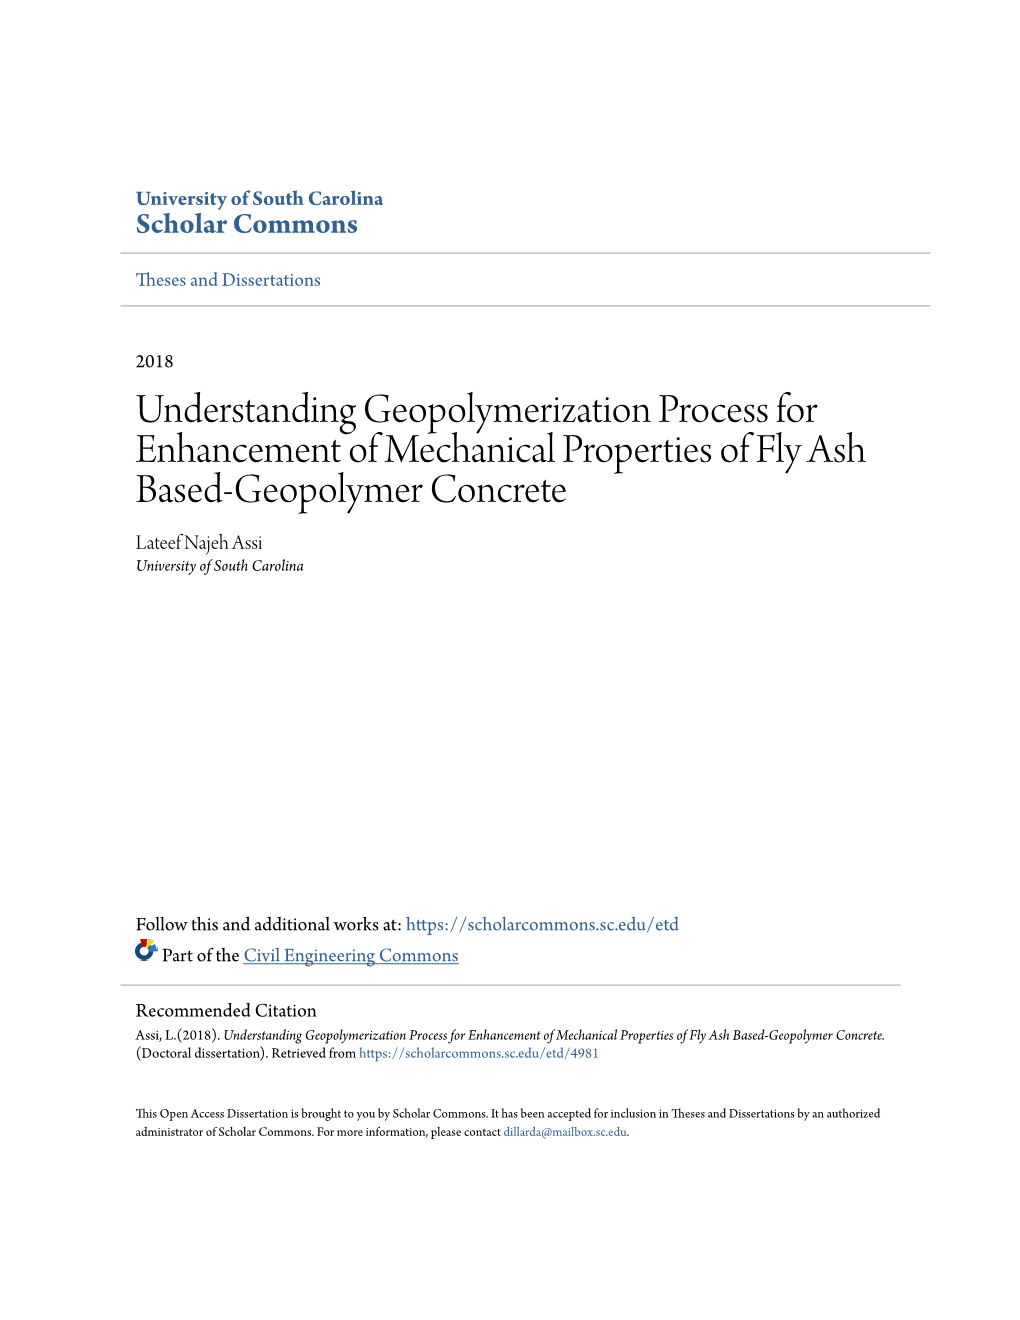 Understanding Geopolymerization Process for Enhancement of Mechanical Properties of Fly Ash Based-Geopolymer Concrete Lateef Najeh Assi University of South Carolina